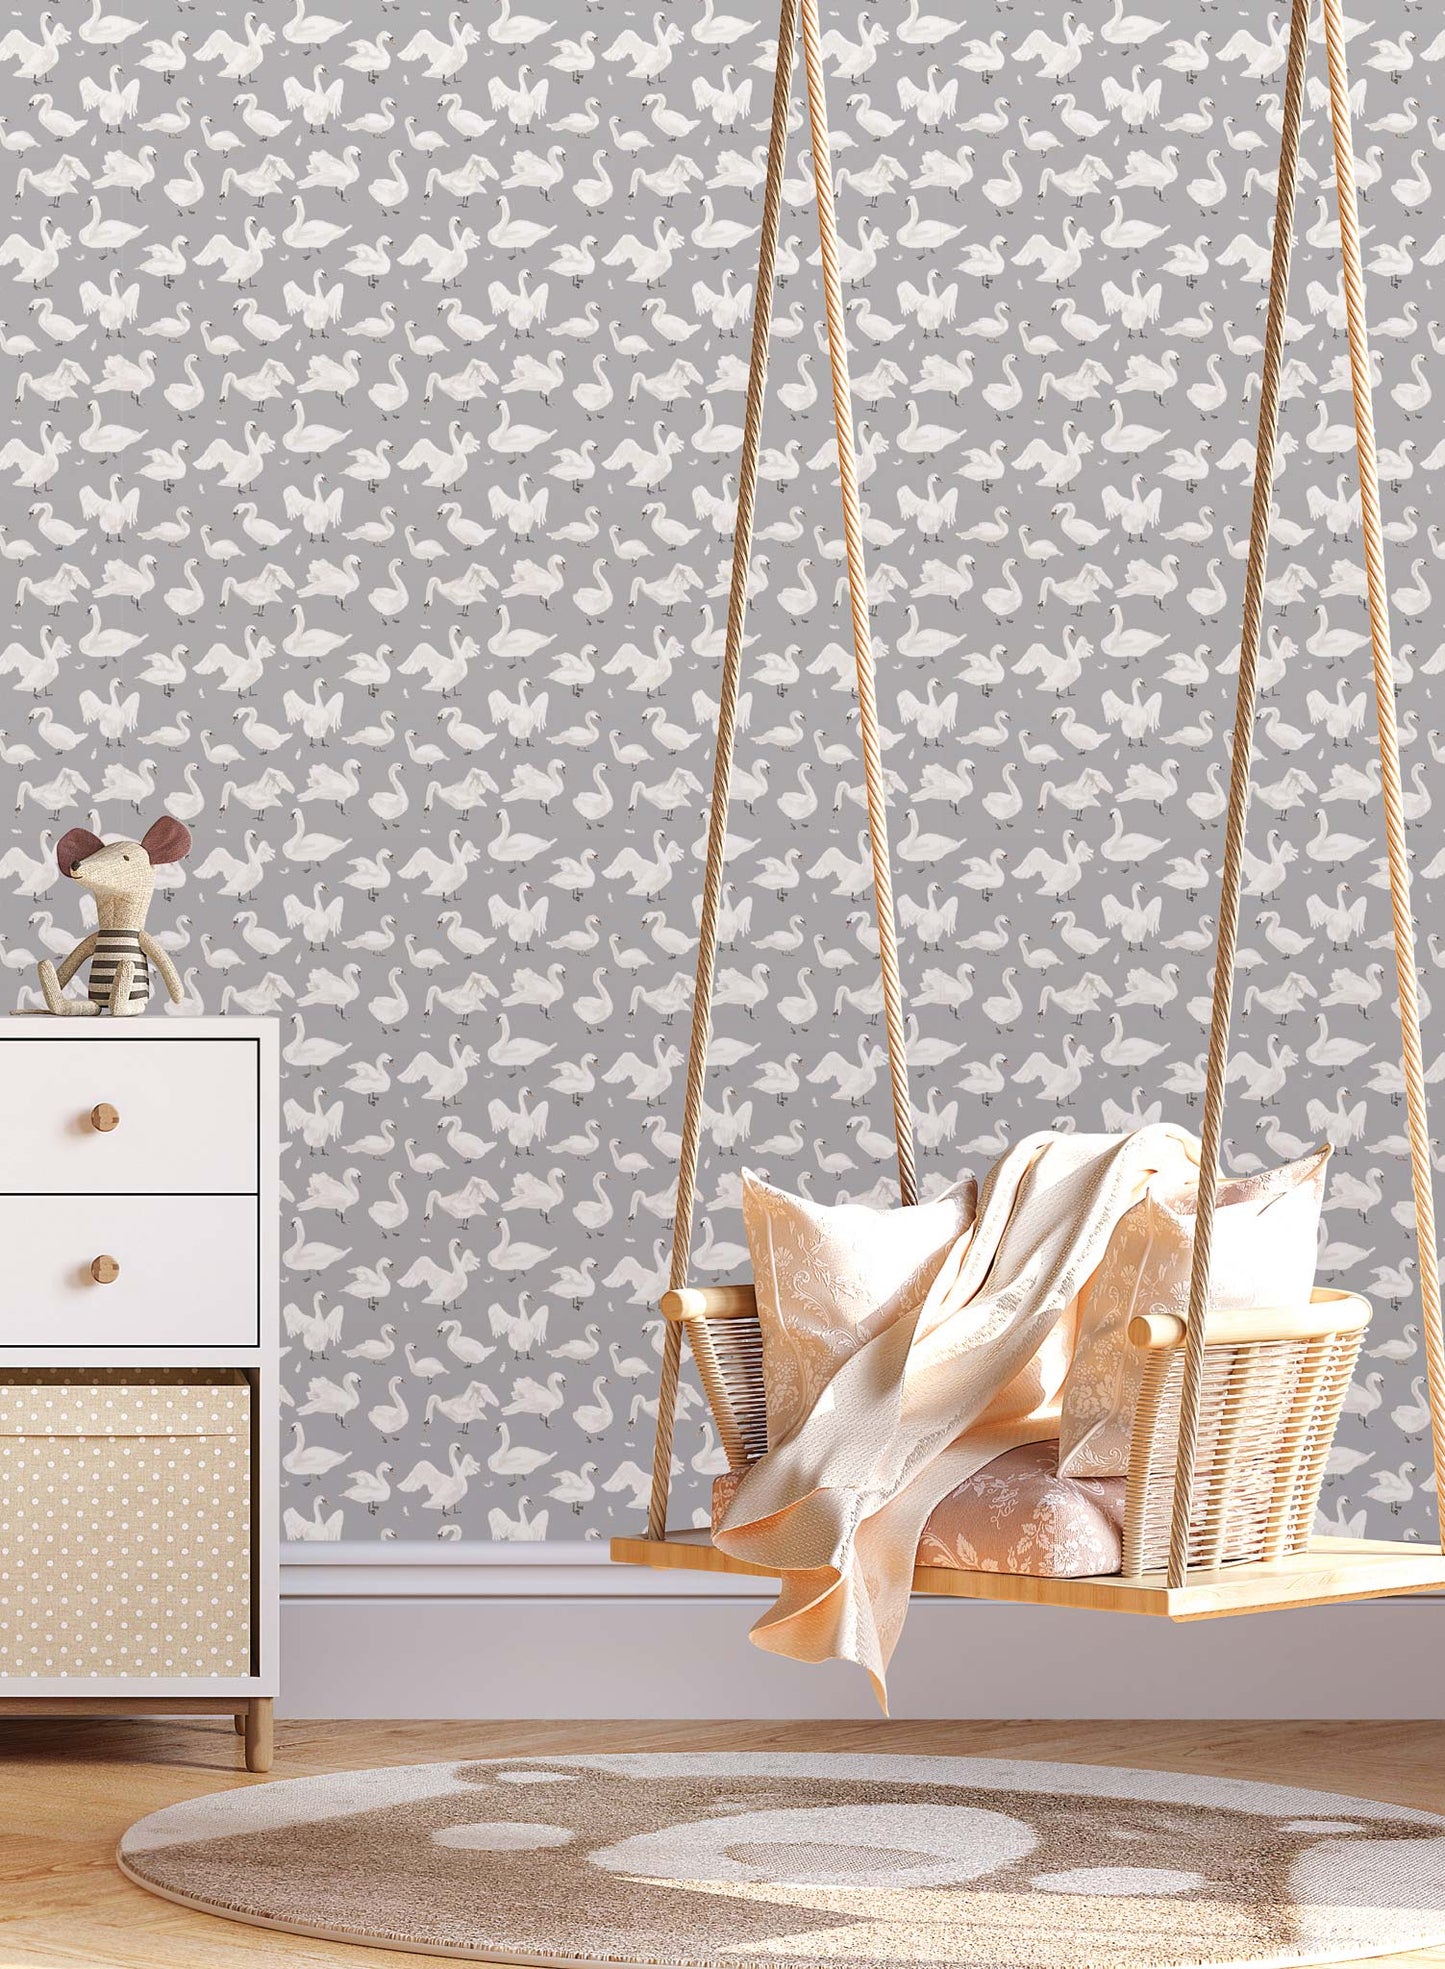 Mother Goose is a Minimalist wallpaper by Opposite Wall of gooses floating around.